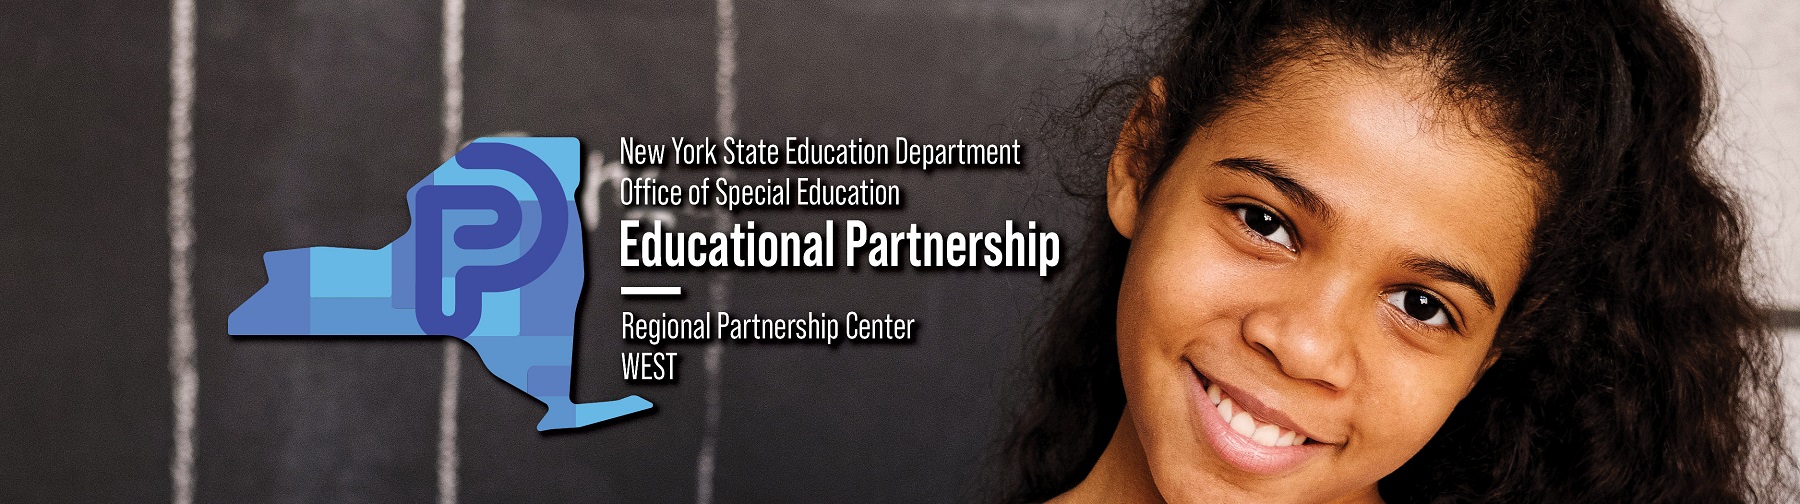 New York State Education Department Office of Special Education Regional Partnership Center West